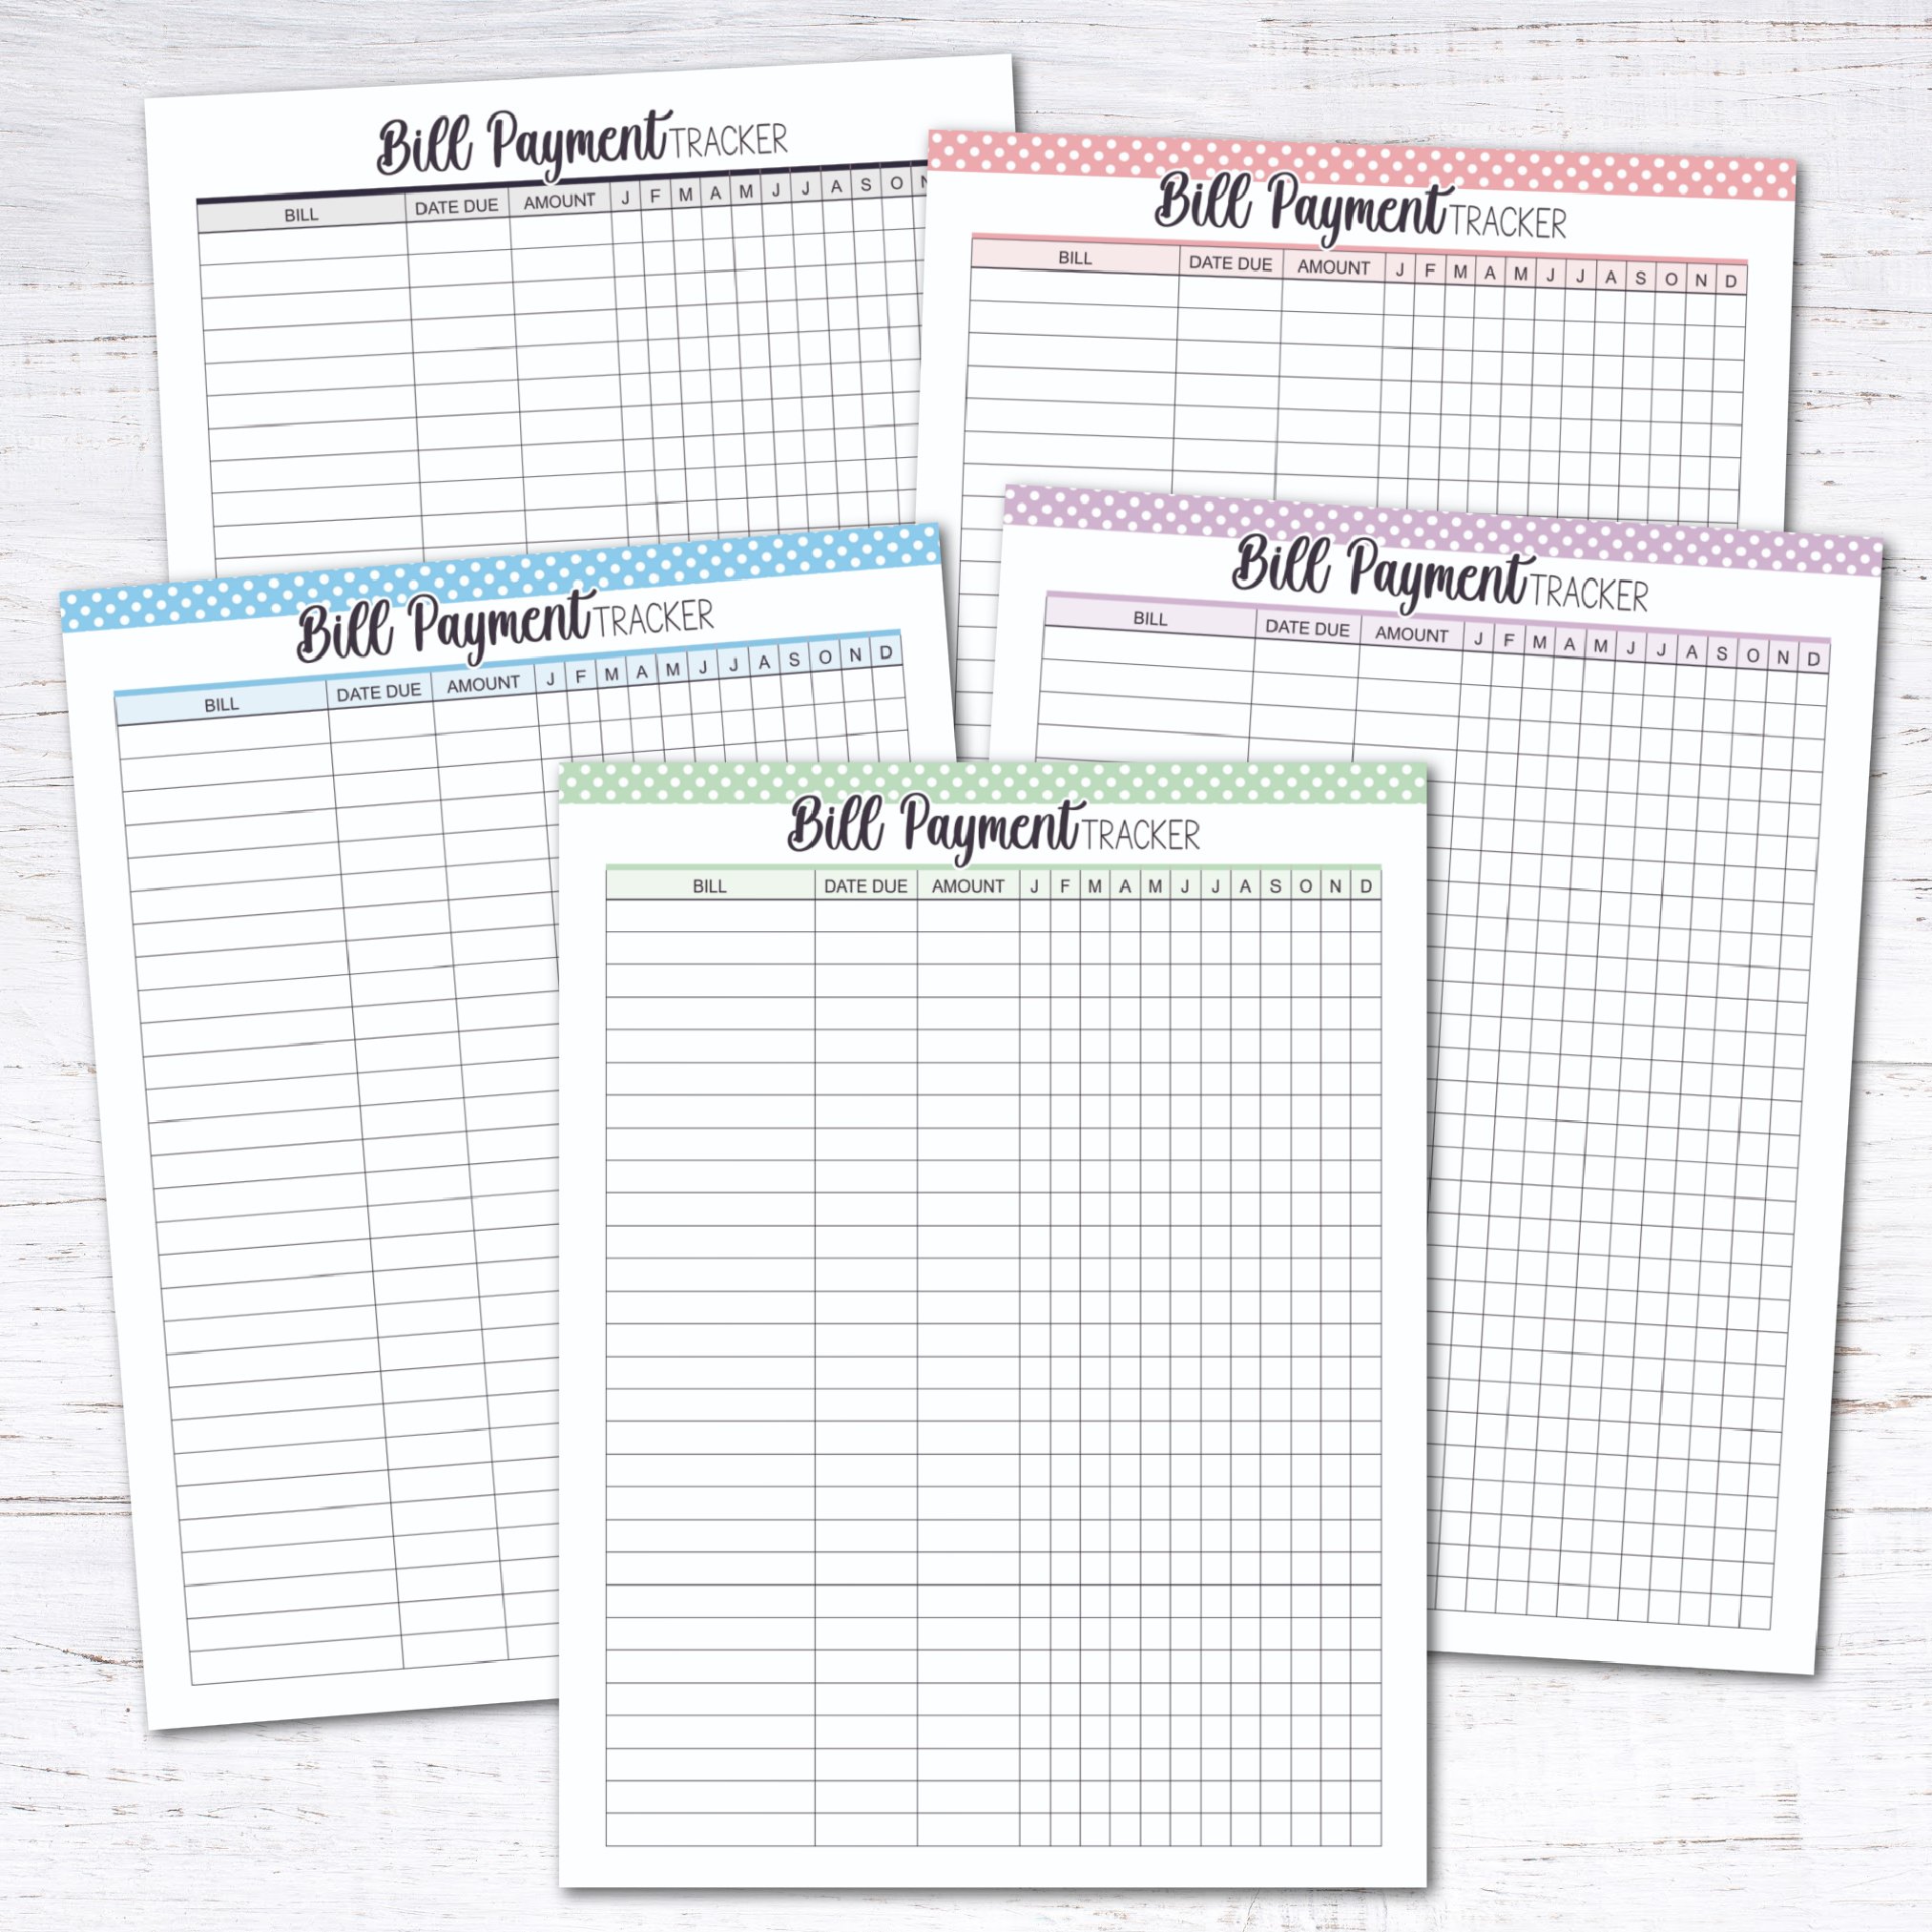 Bill Payment Tracker Free Printable (Day 4) .jpg